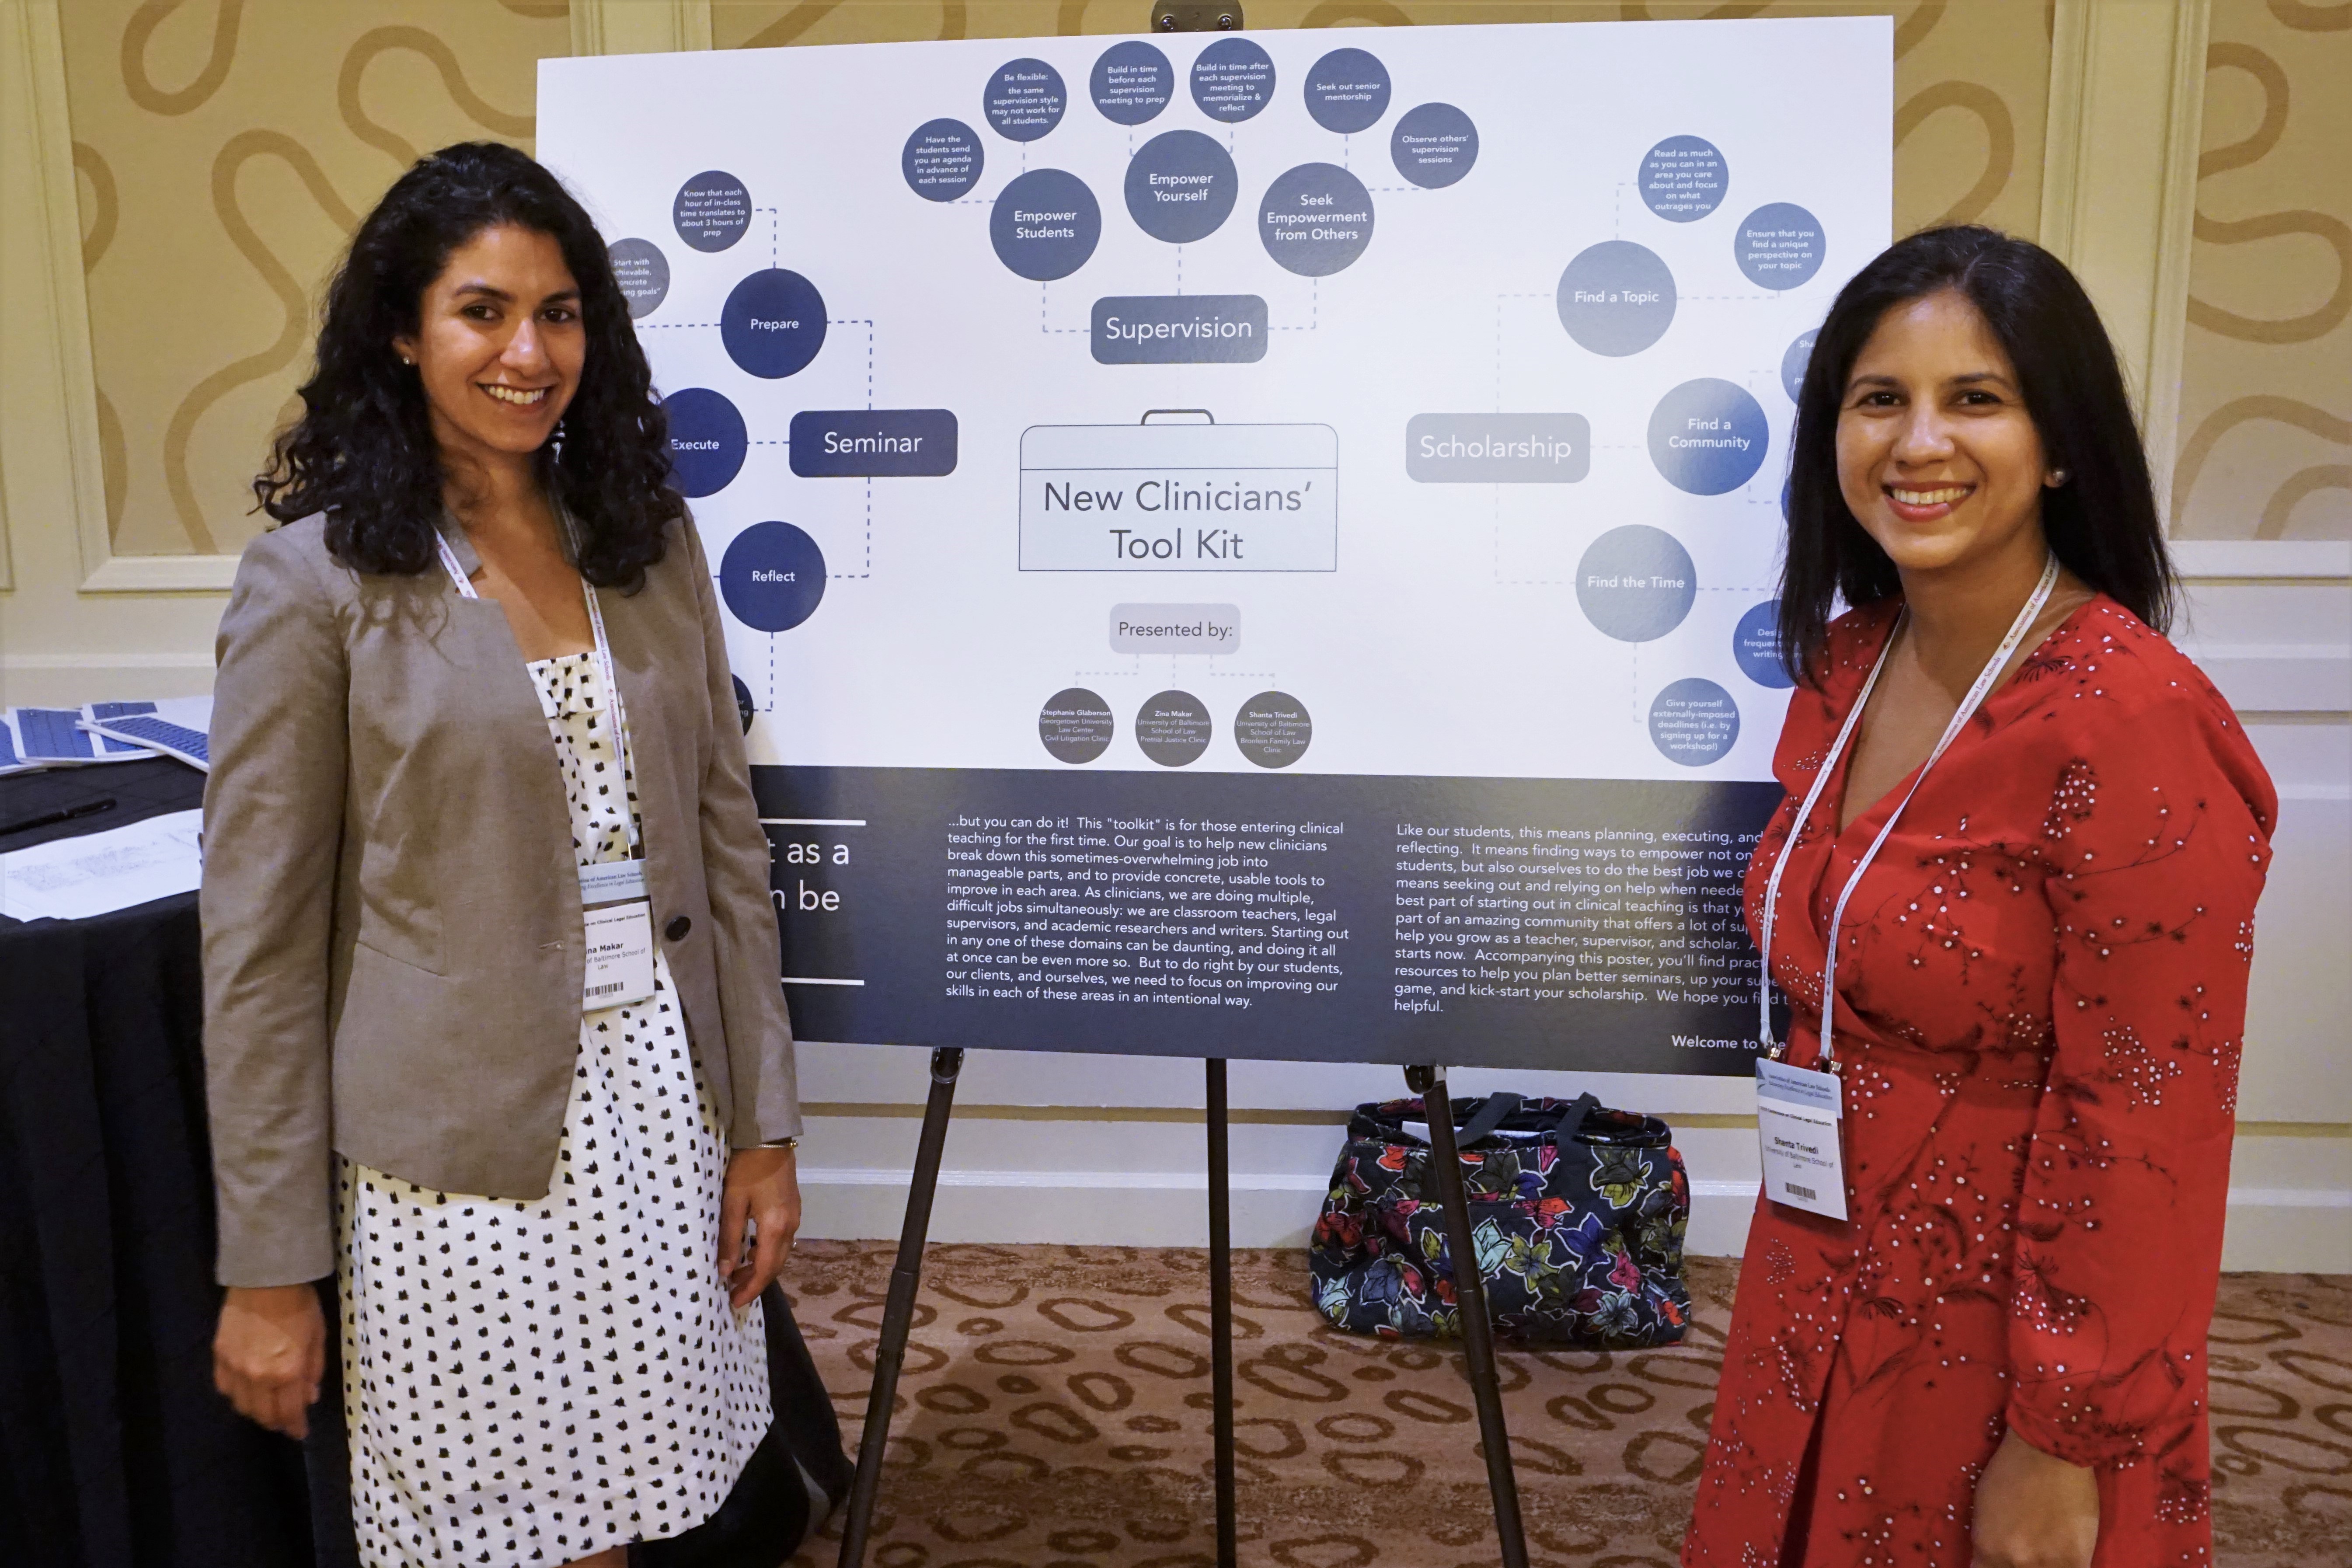 Zina Makar and Shanta Trivedi (University of Baltimore Law) present their poster "What the New Clinician Needs to Know to Be an Effective Teacher in a Polarized World."